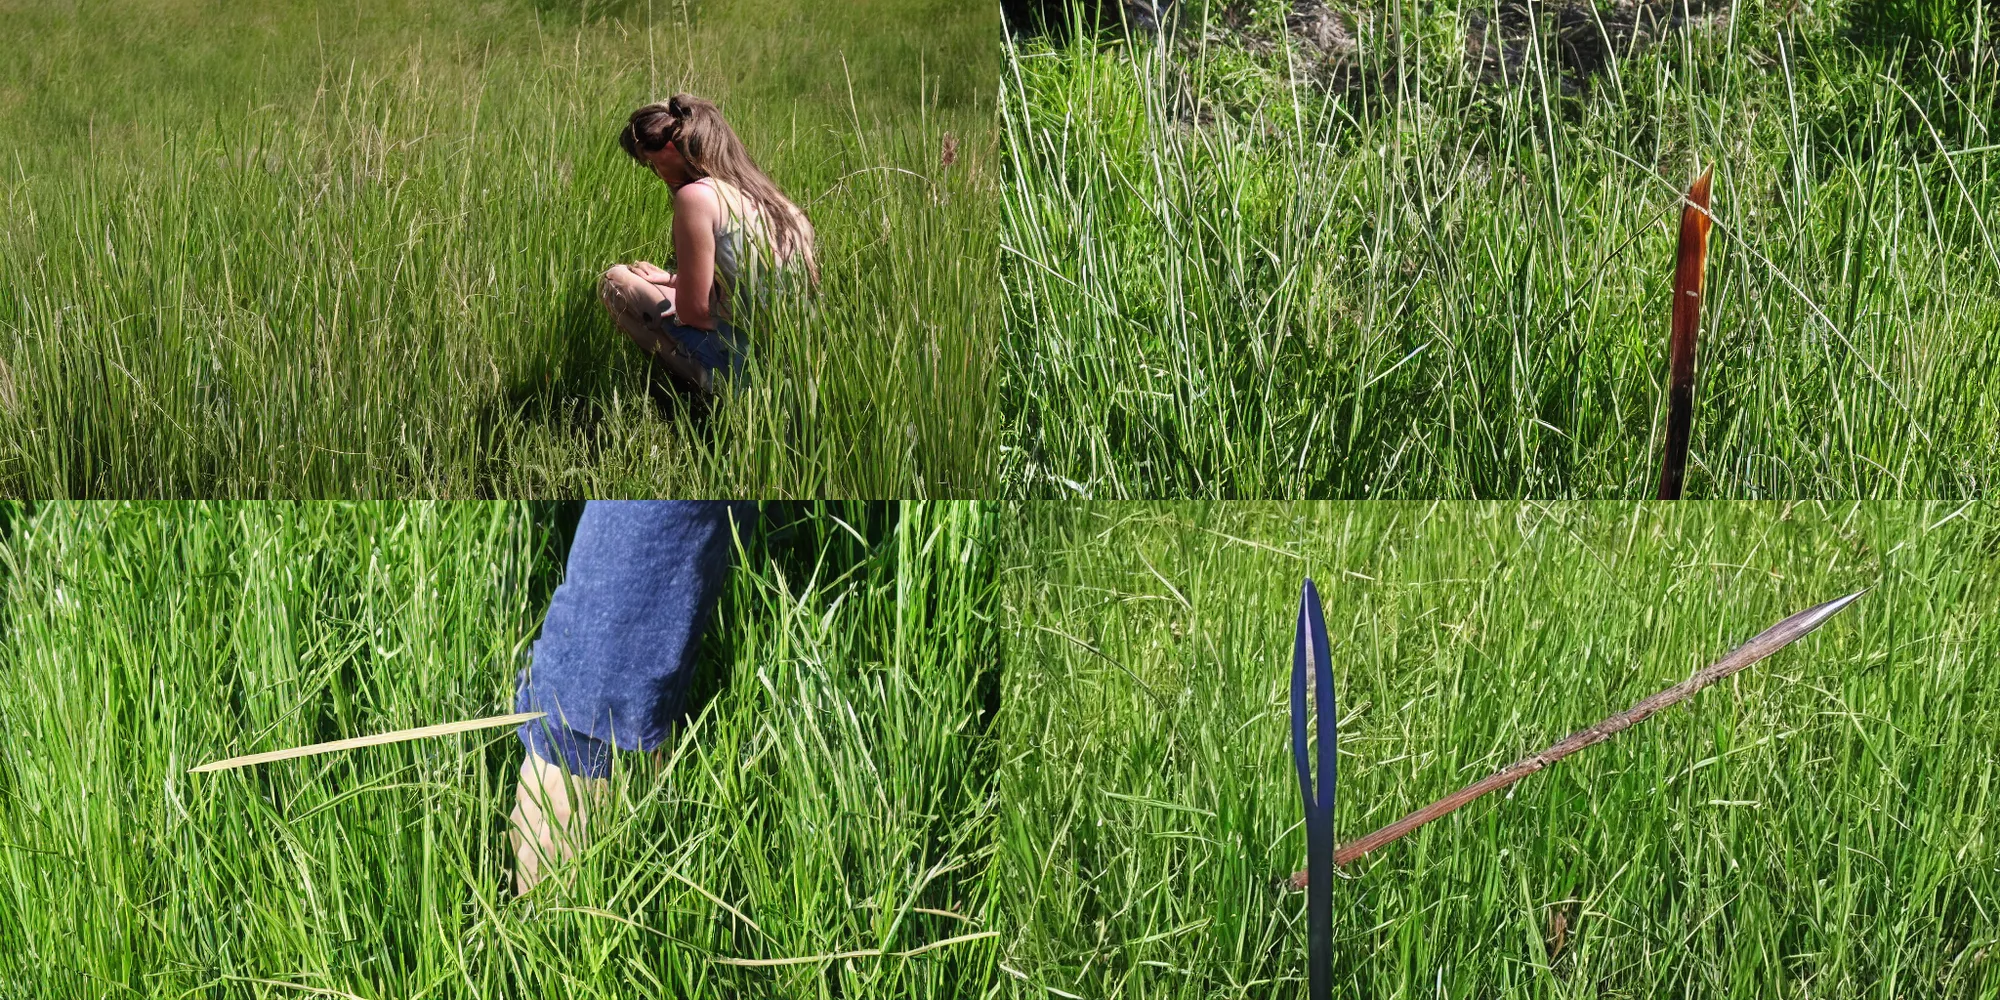 Prompt: I lean and loafe at my ease observing a spear of summer grass.